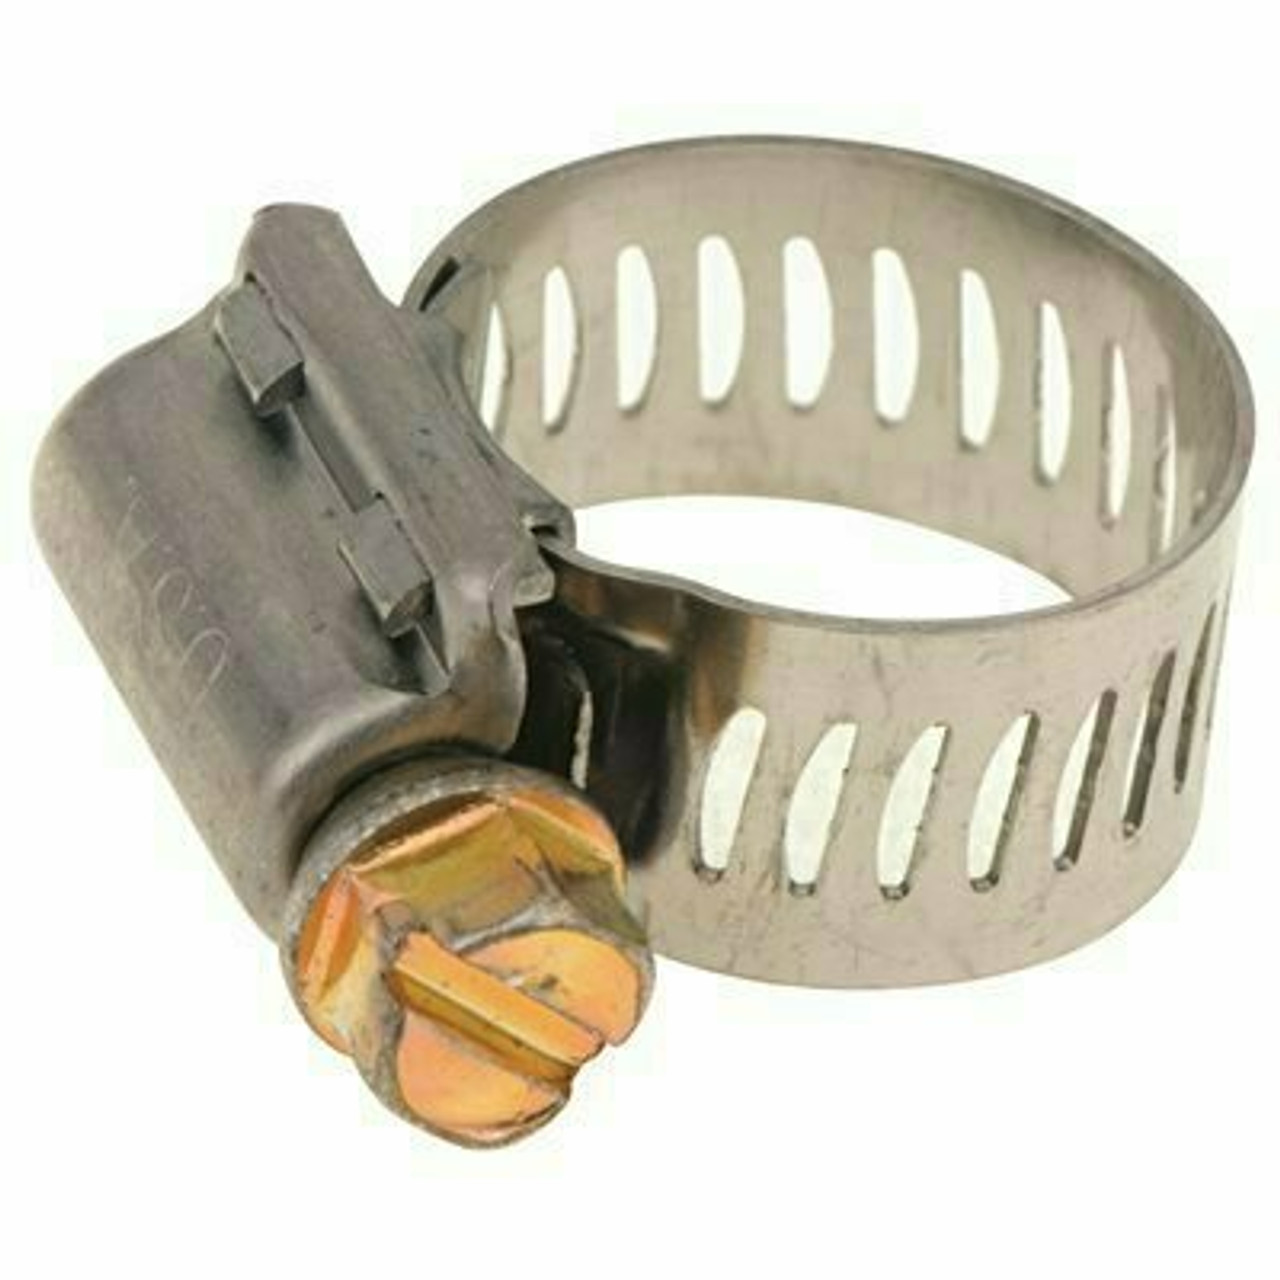 Breeze Clamp Hose Clamp 7/16 In. To 1 In.